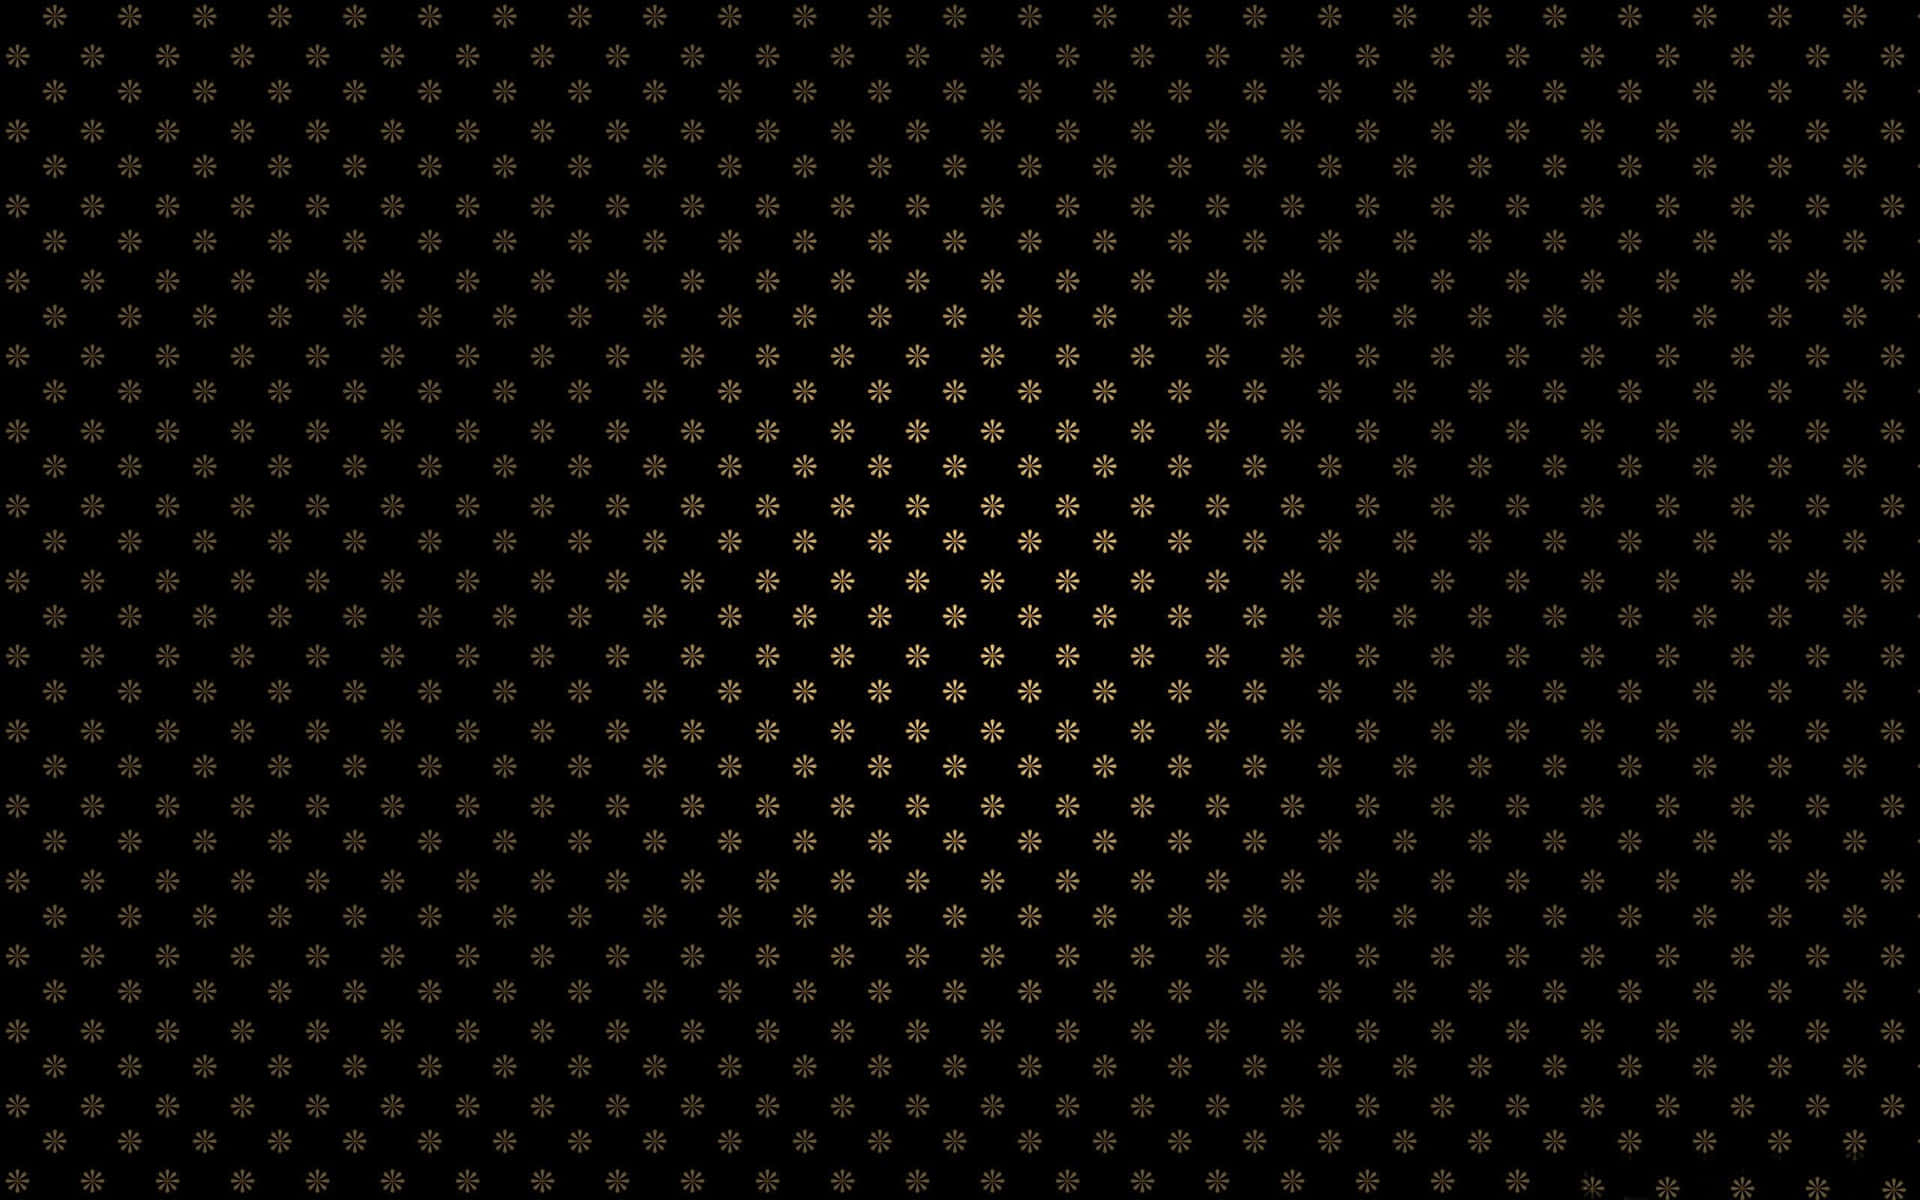 A Black Background With Gold Dots